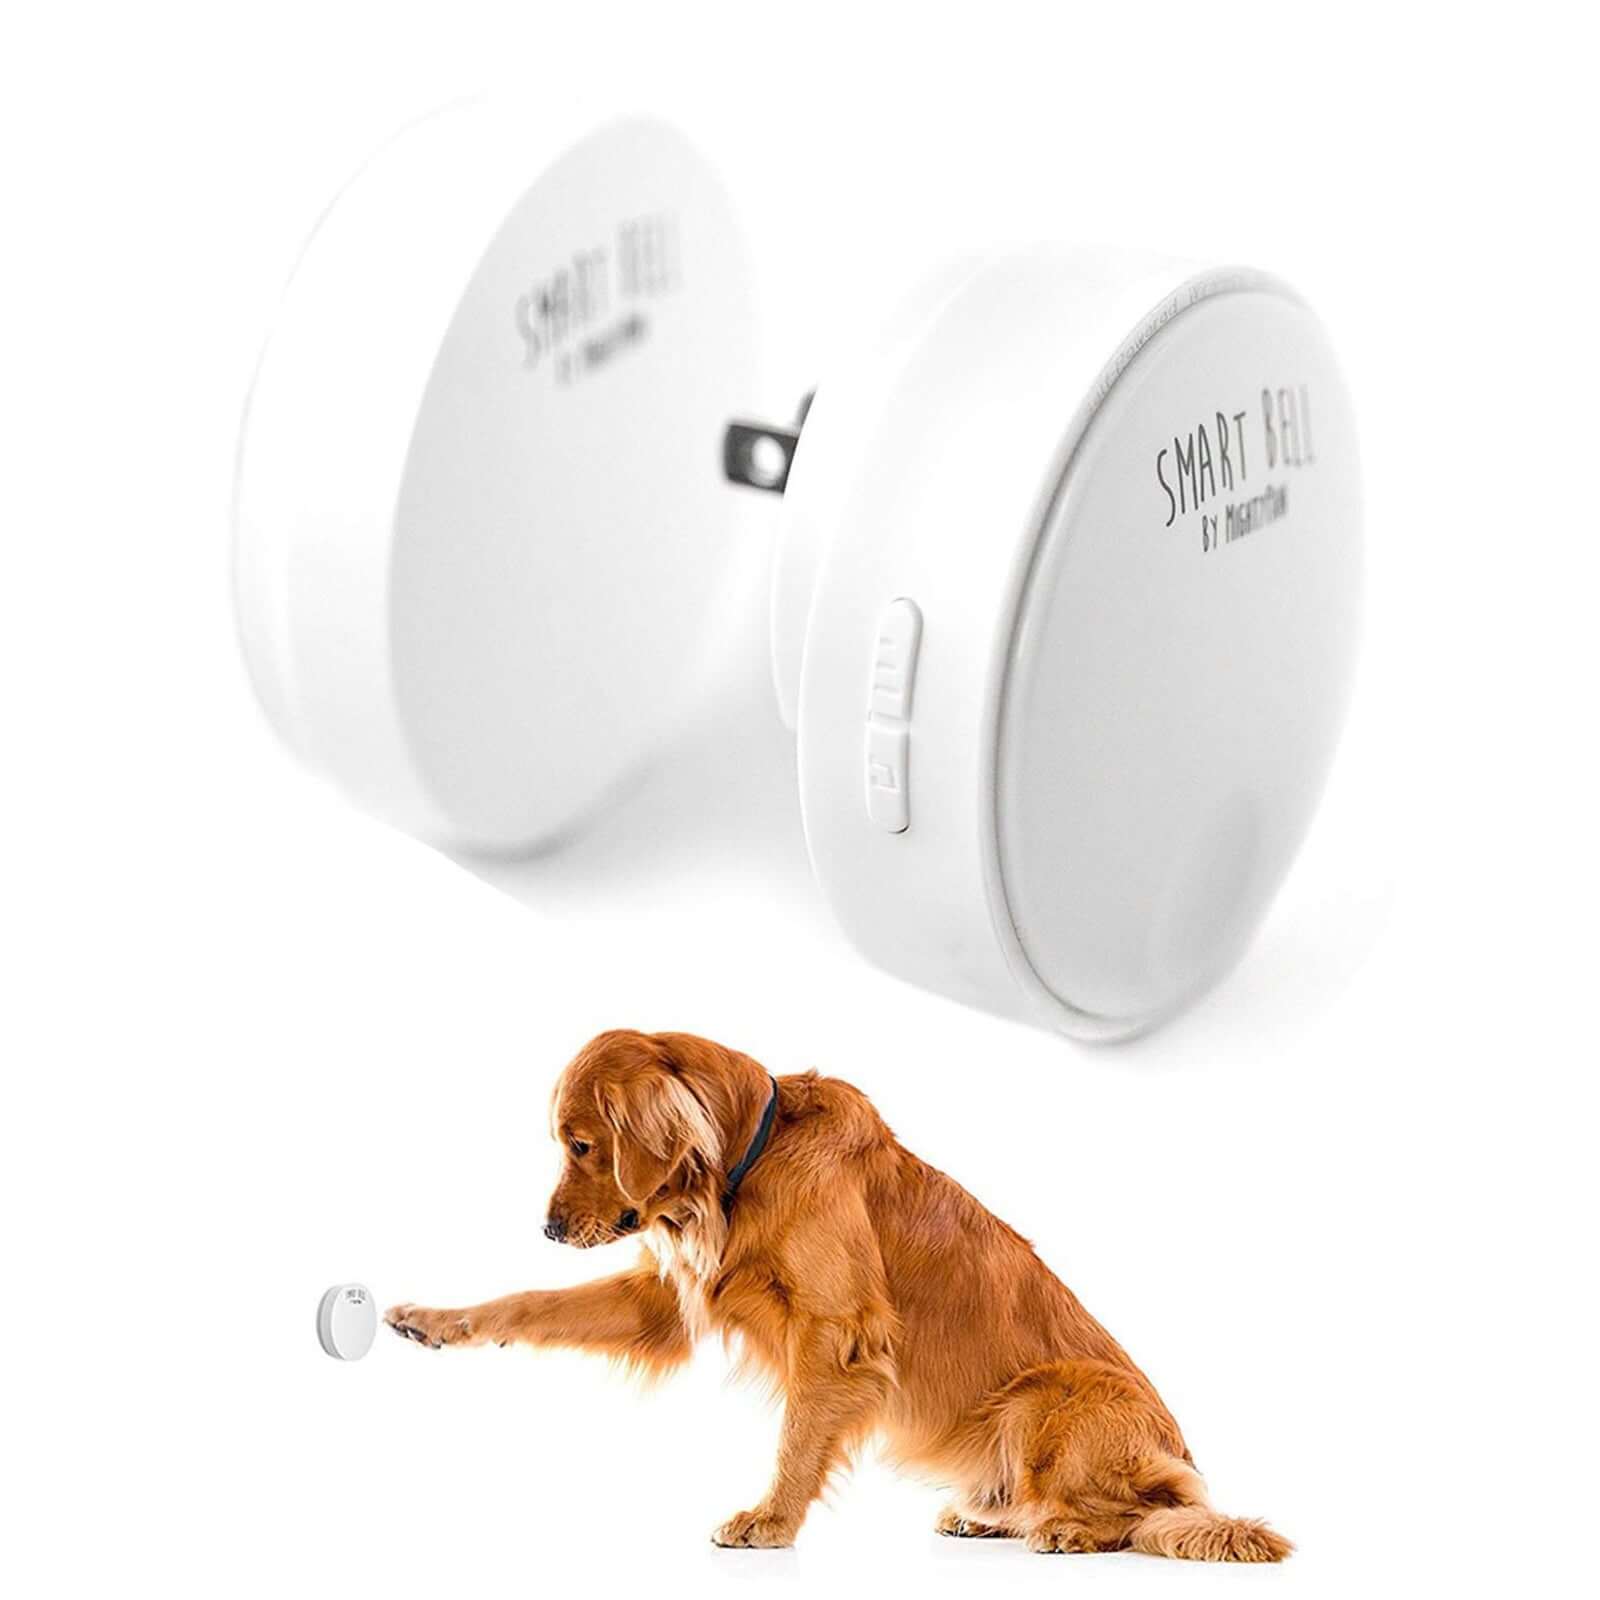 Mighty Paw Smart Bell 2.0: Potty Training Made Simple